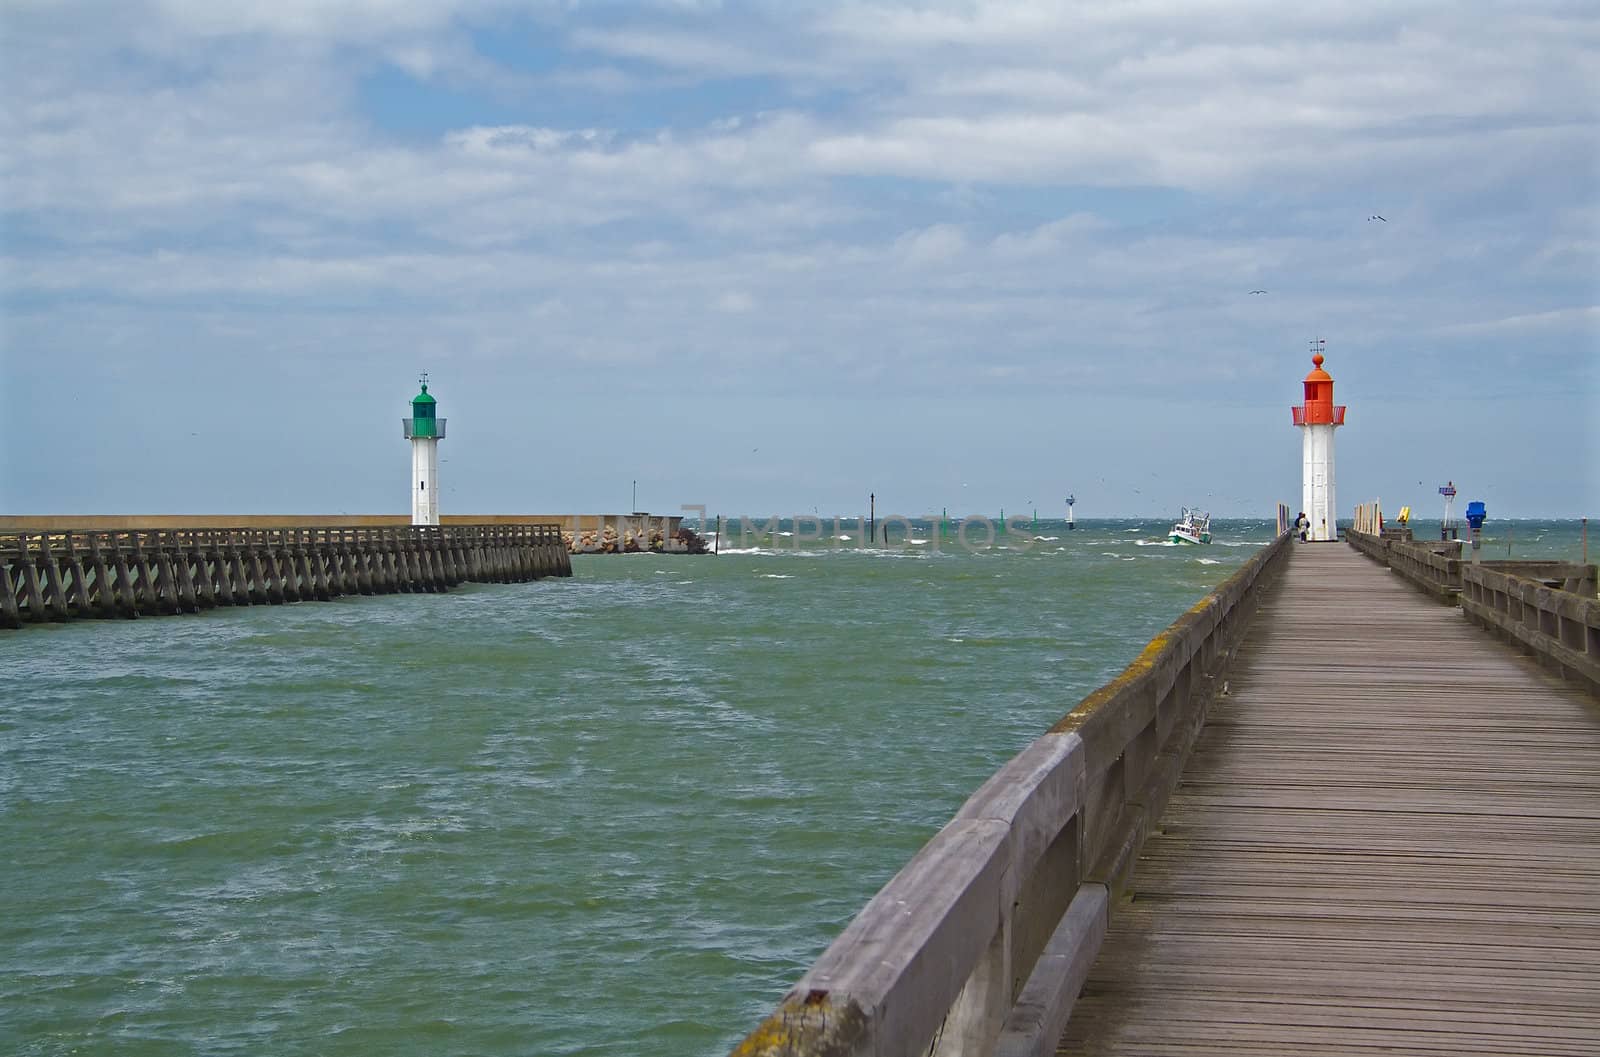 Two decks and lighthouses marking the entrance of the Trouville port, Normandy, France